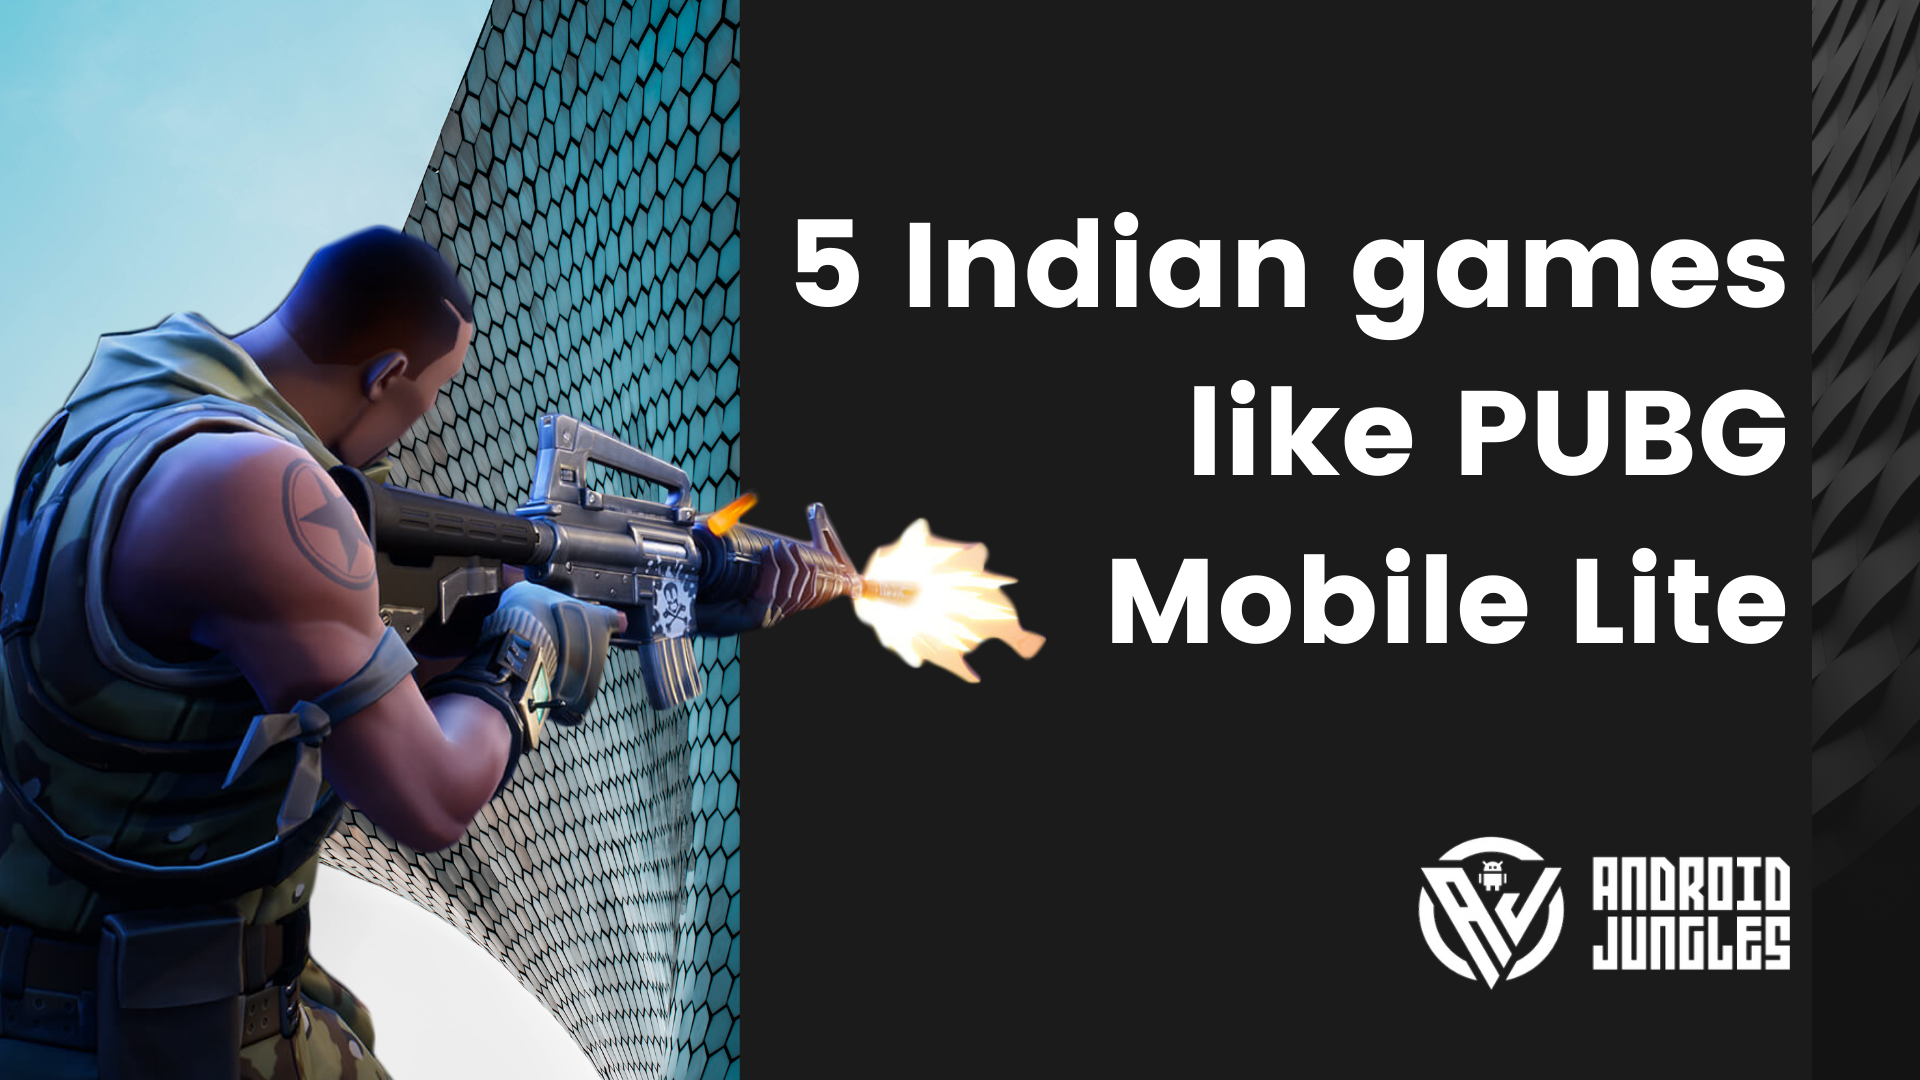 5 Indian games like PUBG Mobile Lite on Android